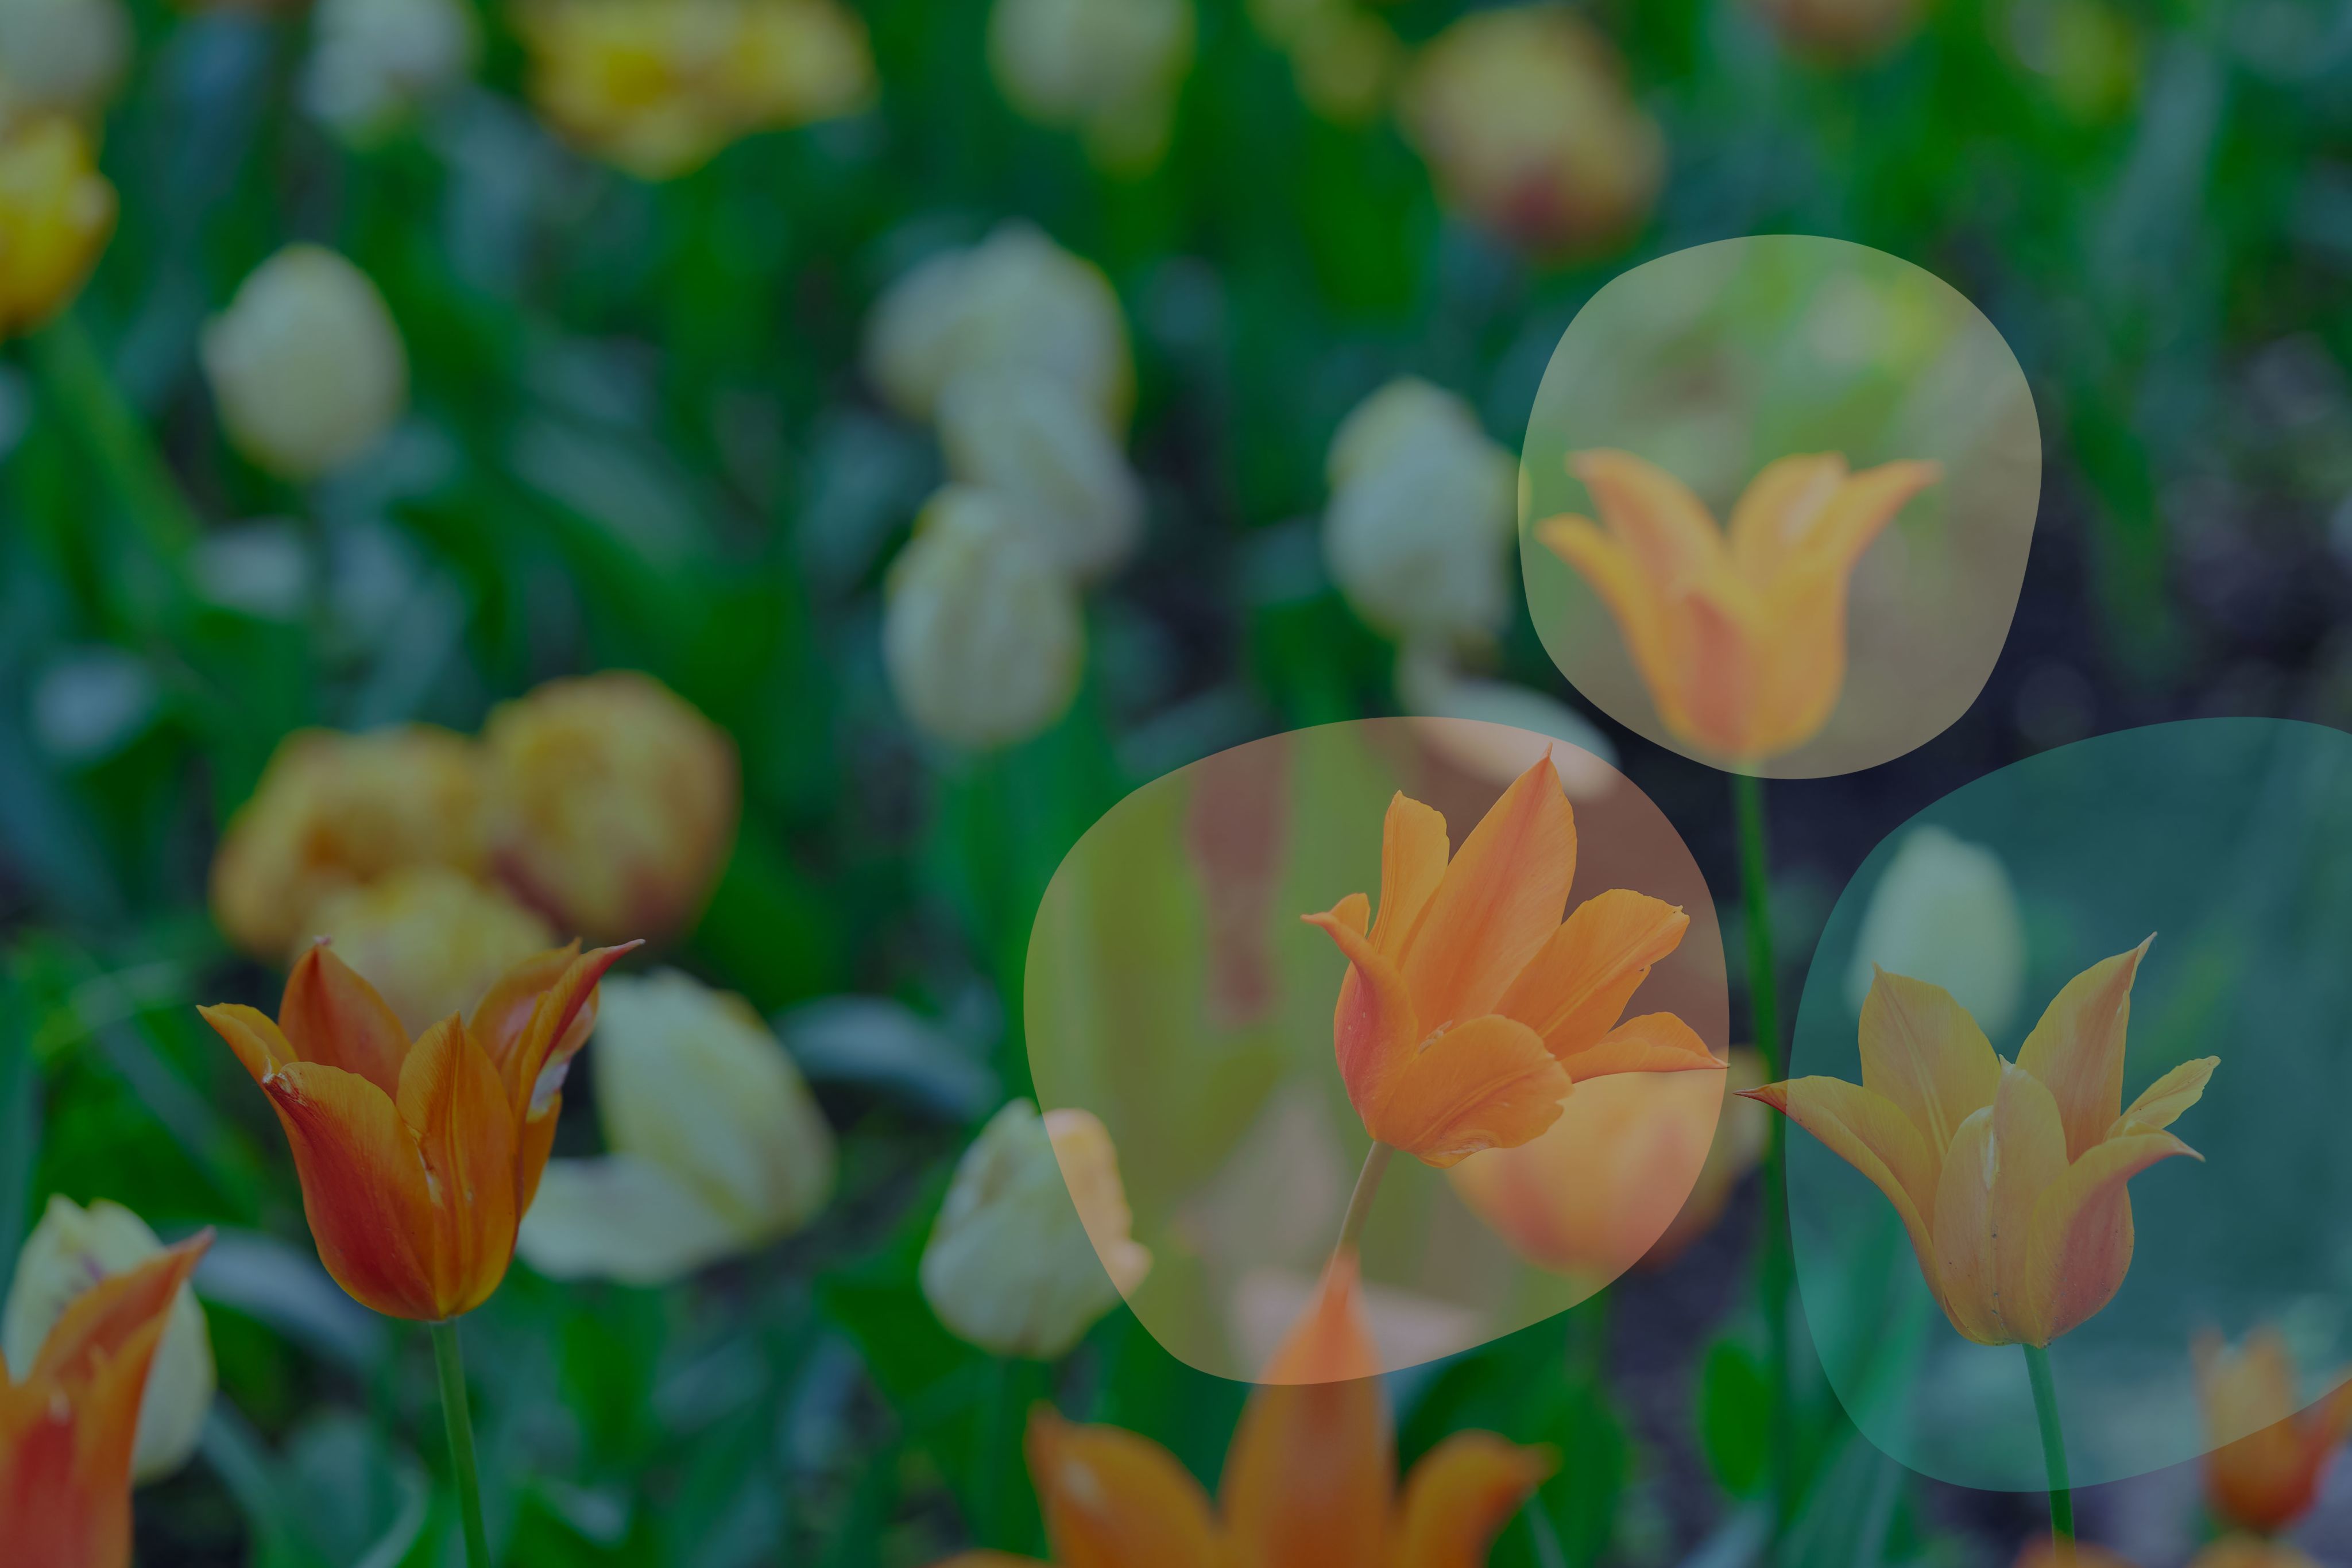 background image of orange tulips with the RNE logo superimposed on top